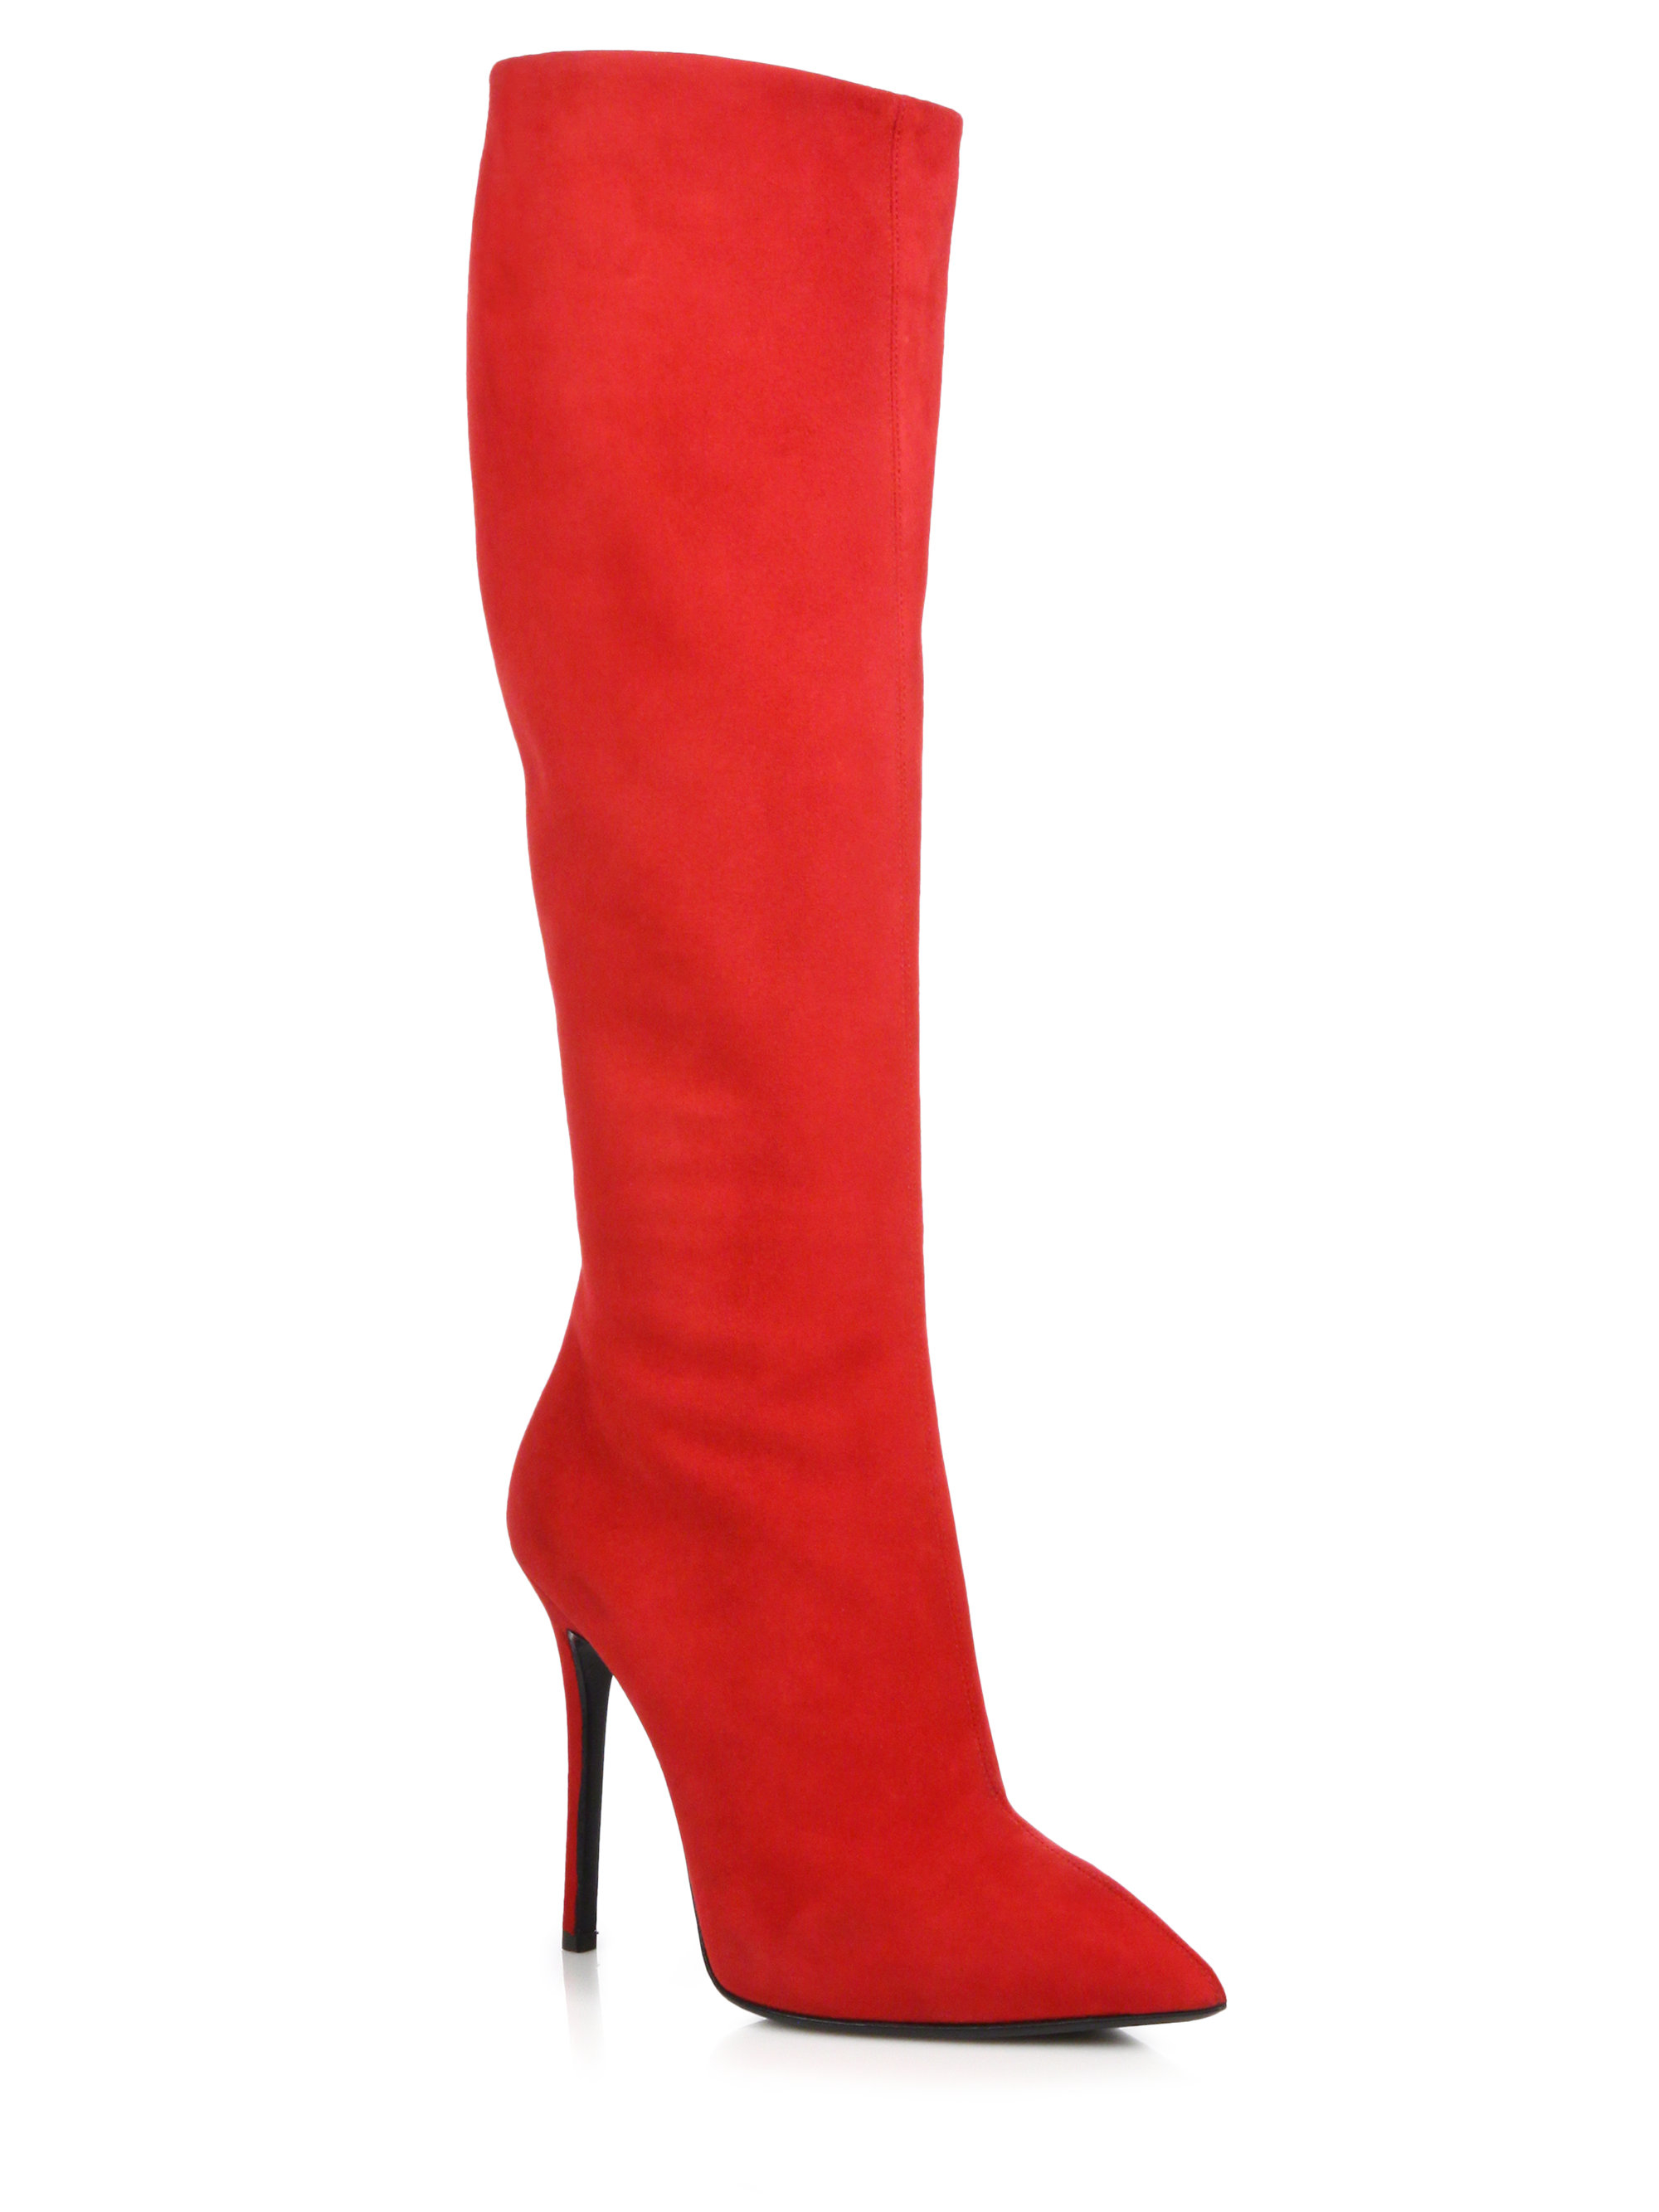 Lyst - Giuseppe Zanotti Suede Knee-high Point-toe Boots in Red